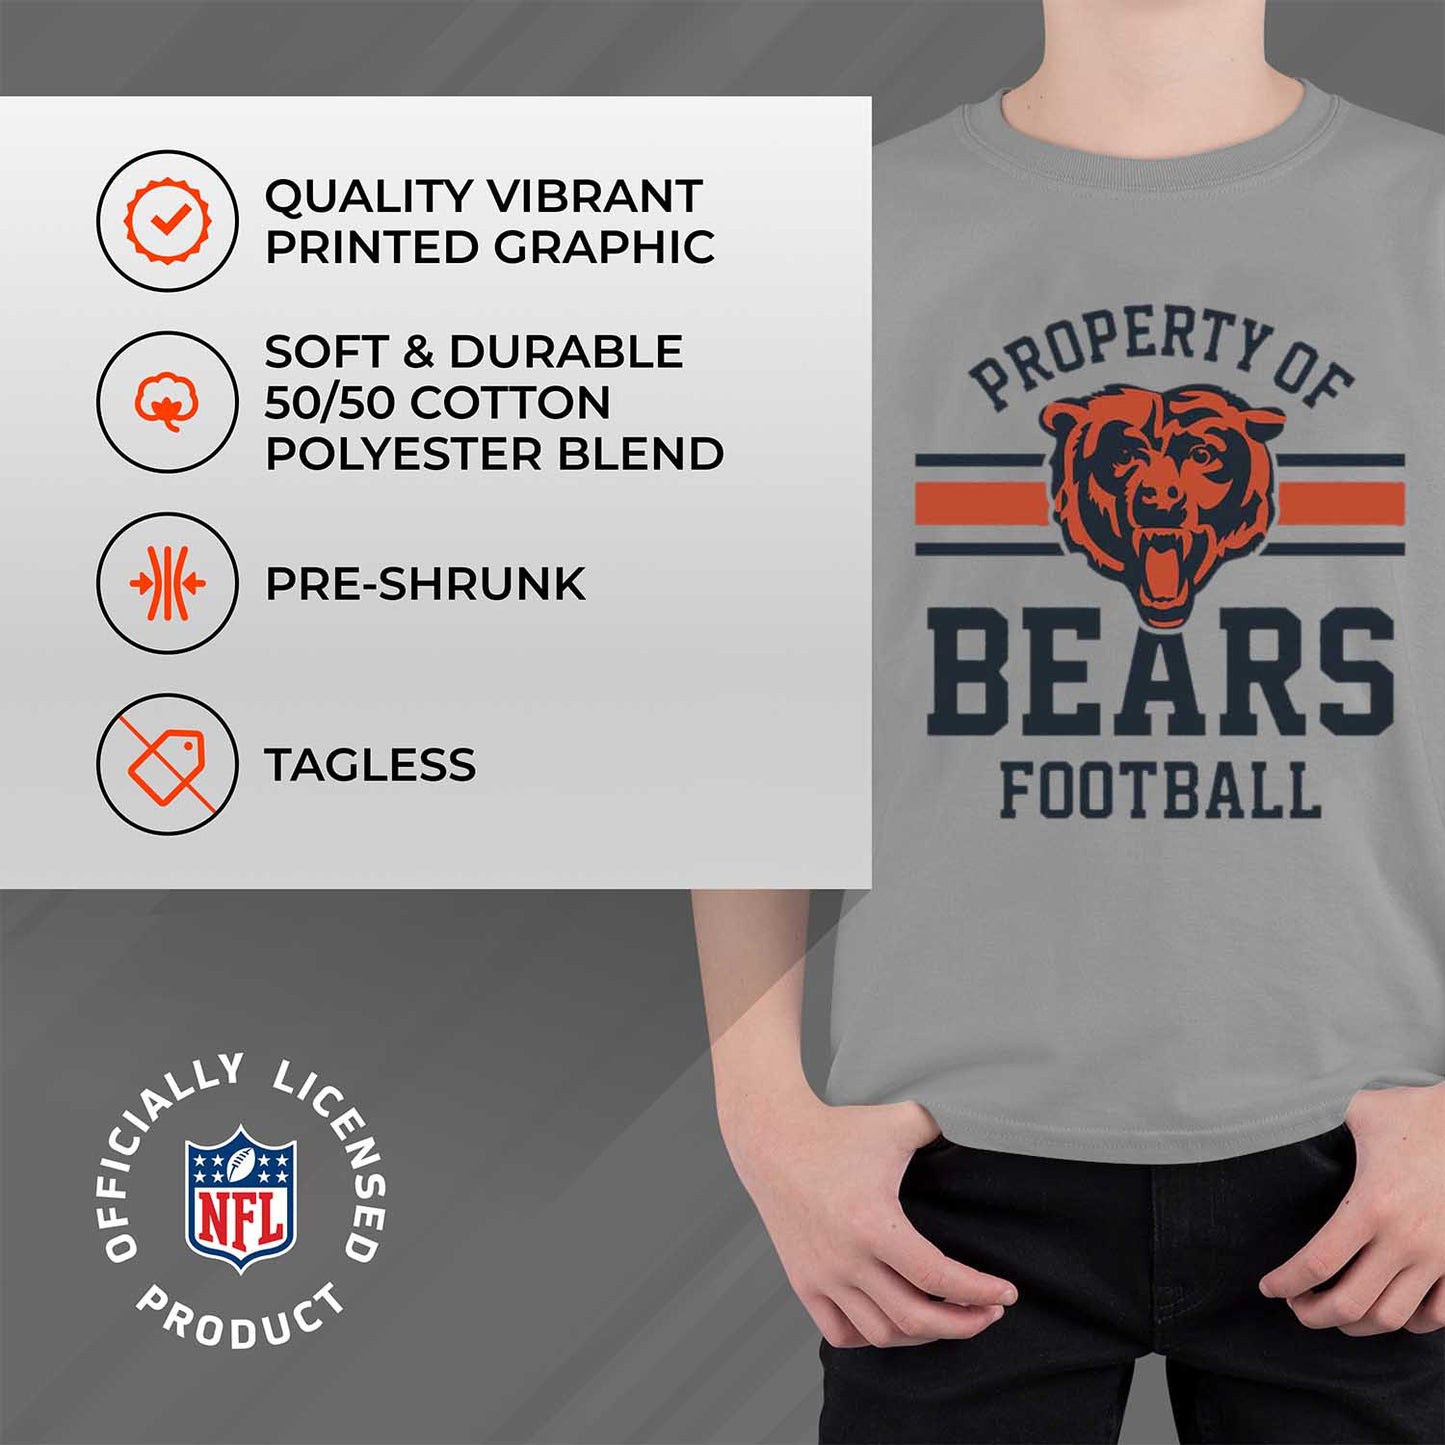 Chicago Bears NFL Youth Property Of Short Sleeve Lightweight T Shirt - Sport Gray